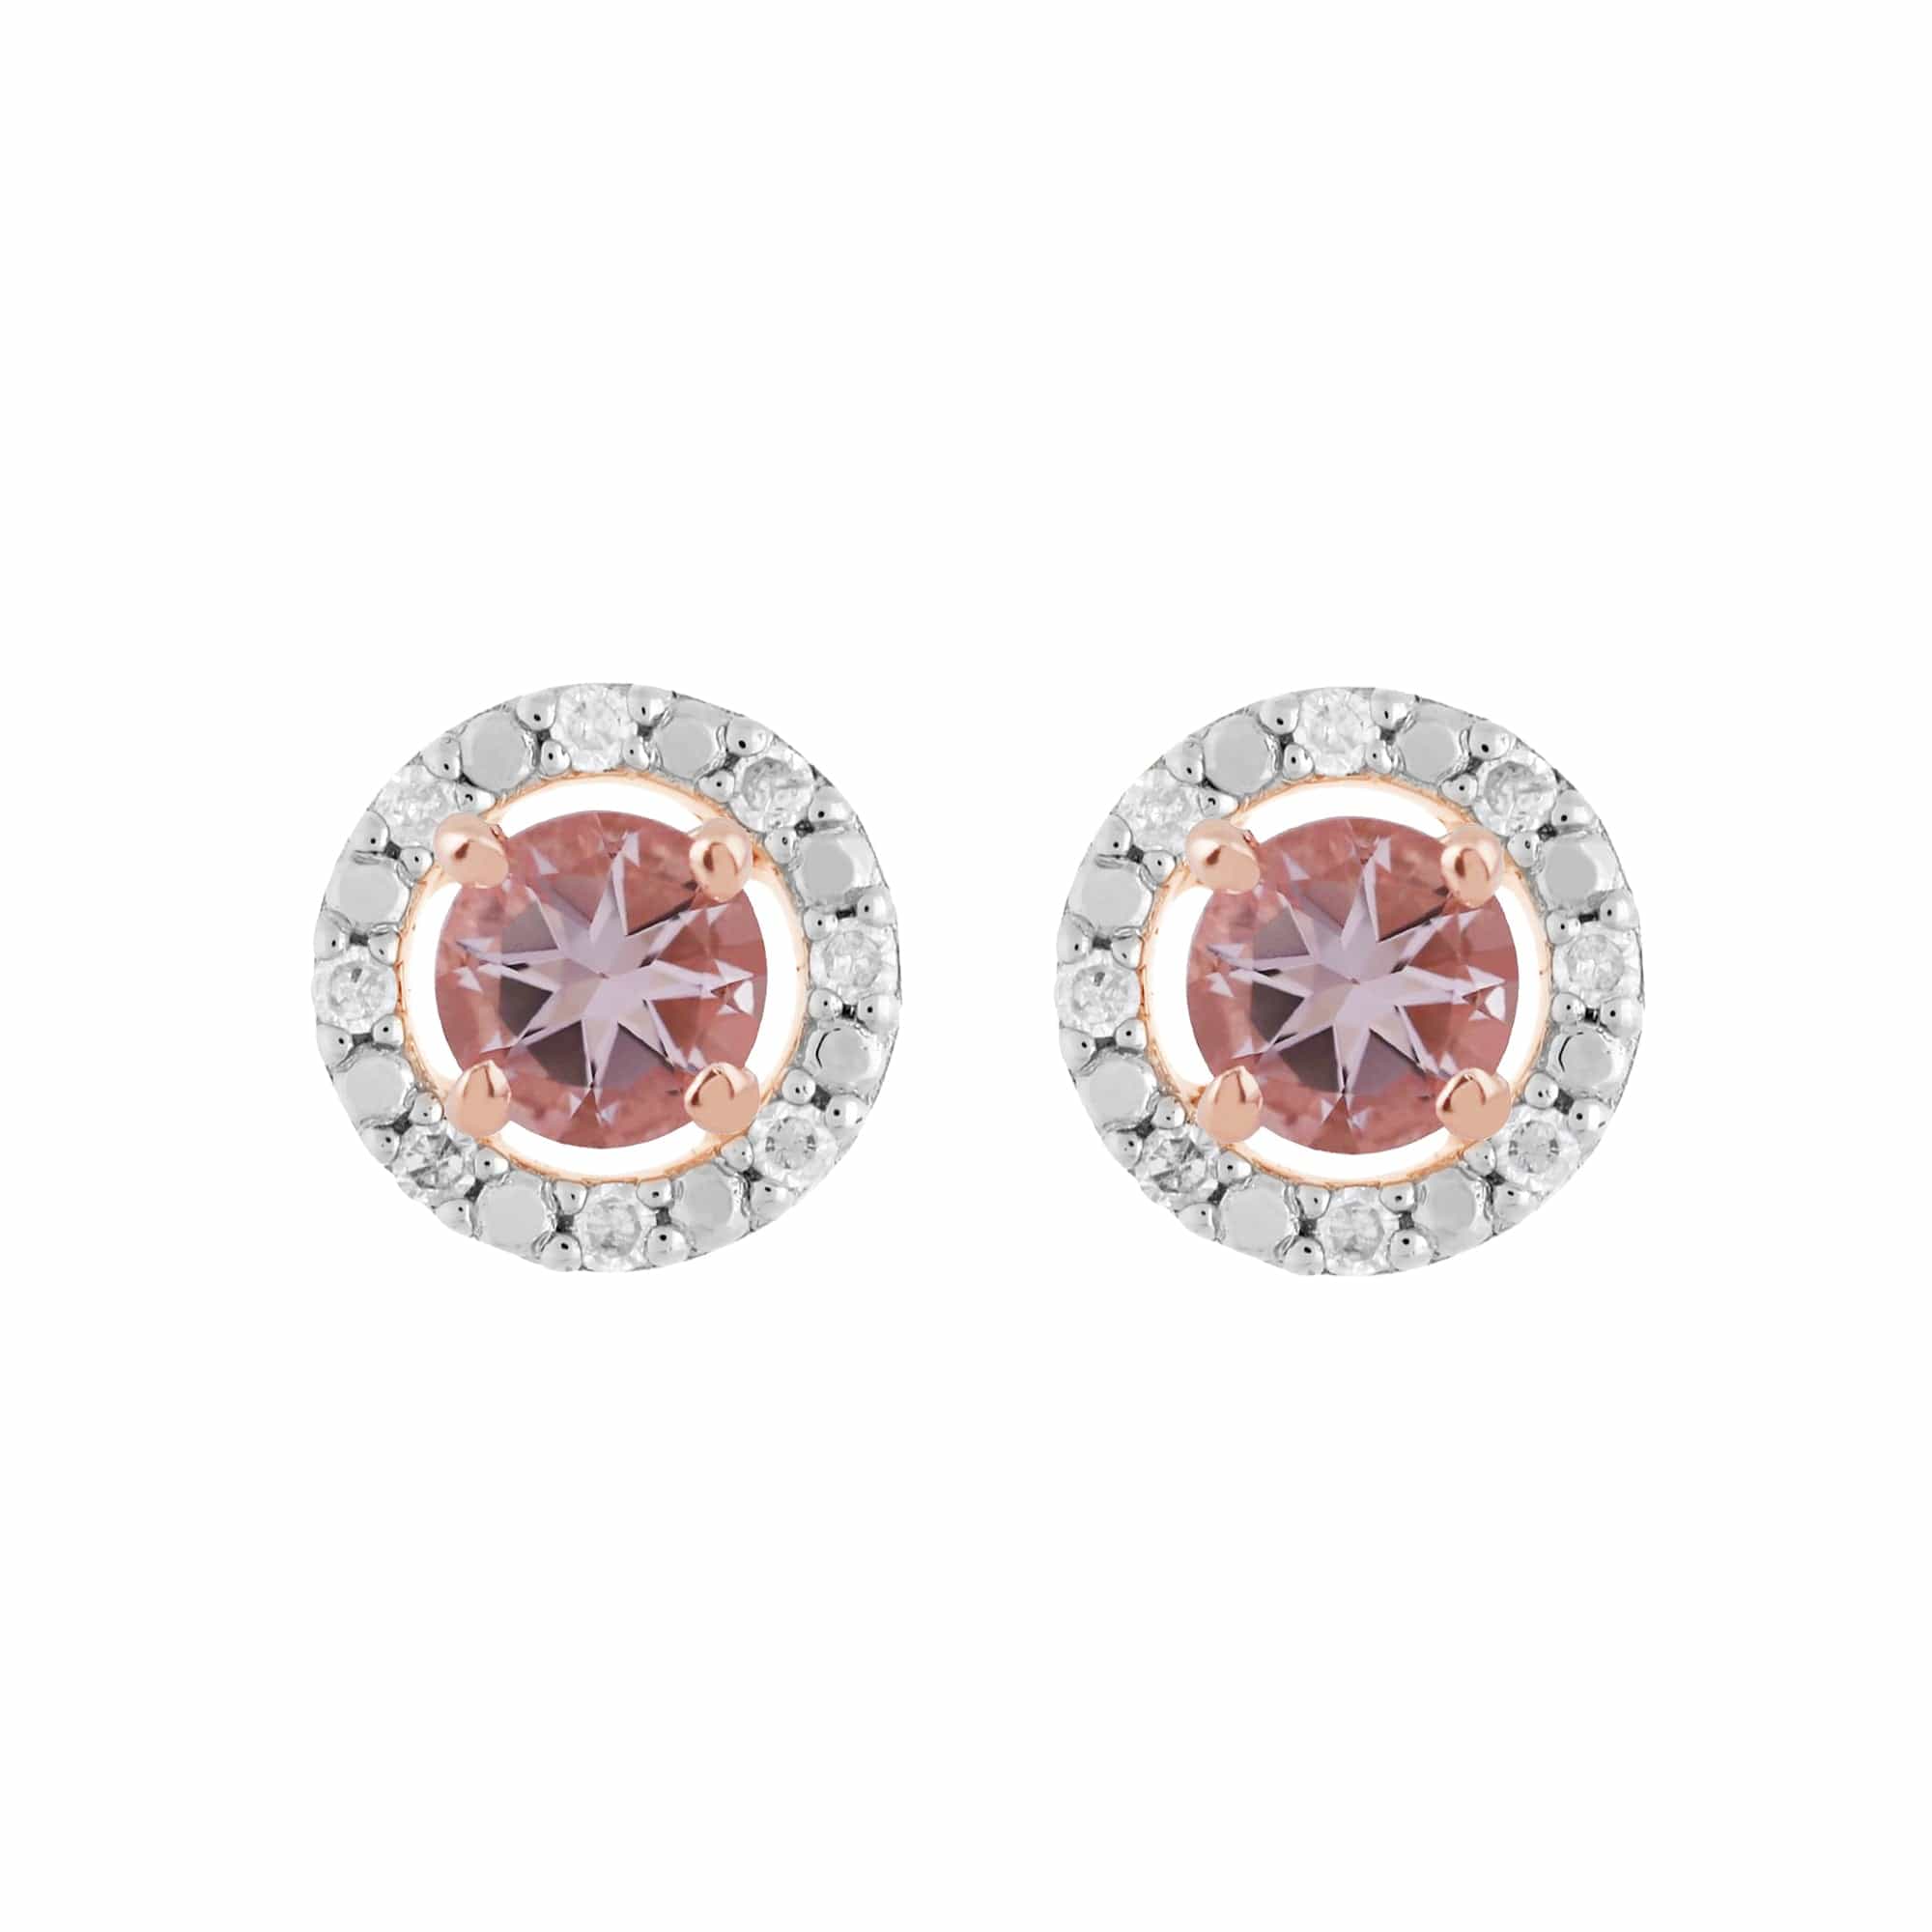 183E4316019-191E0377019 Classic Round Morganite Stud Earrings with Detachable Diamond Round Ear Jacket in 9ct Rose Gold 1